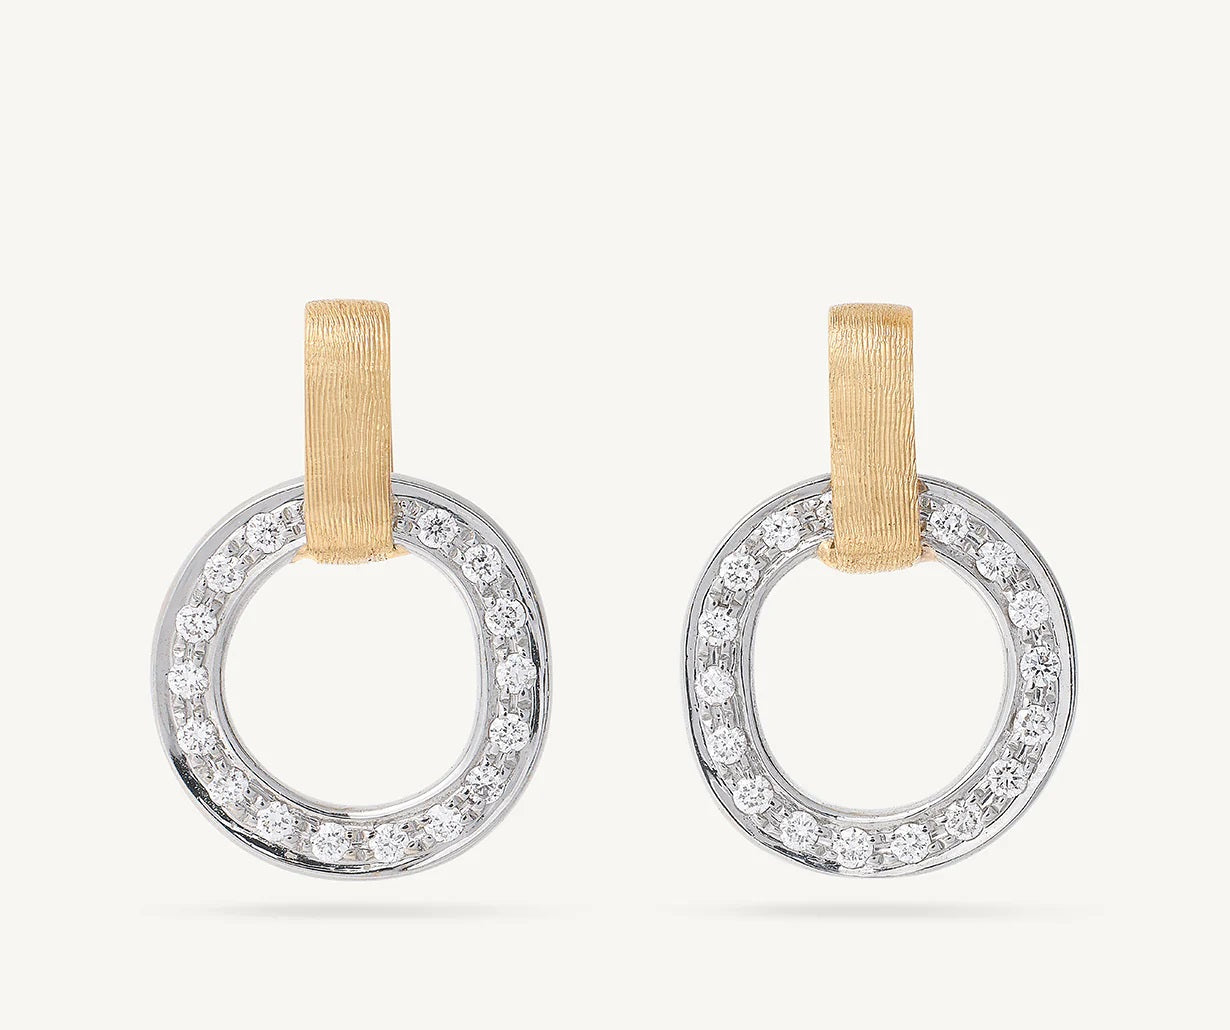 18K YELLOW & WHITE GOLD FLAT-LINK DIAMOND EARRINGS FROM THE JAIPUR LINK COLLECTION